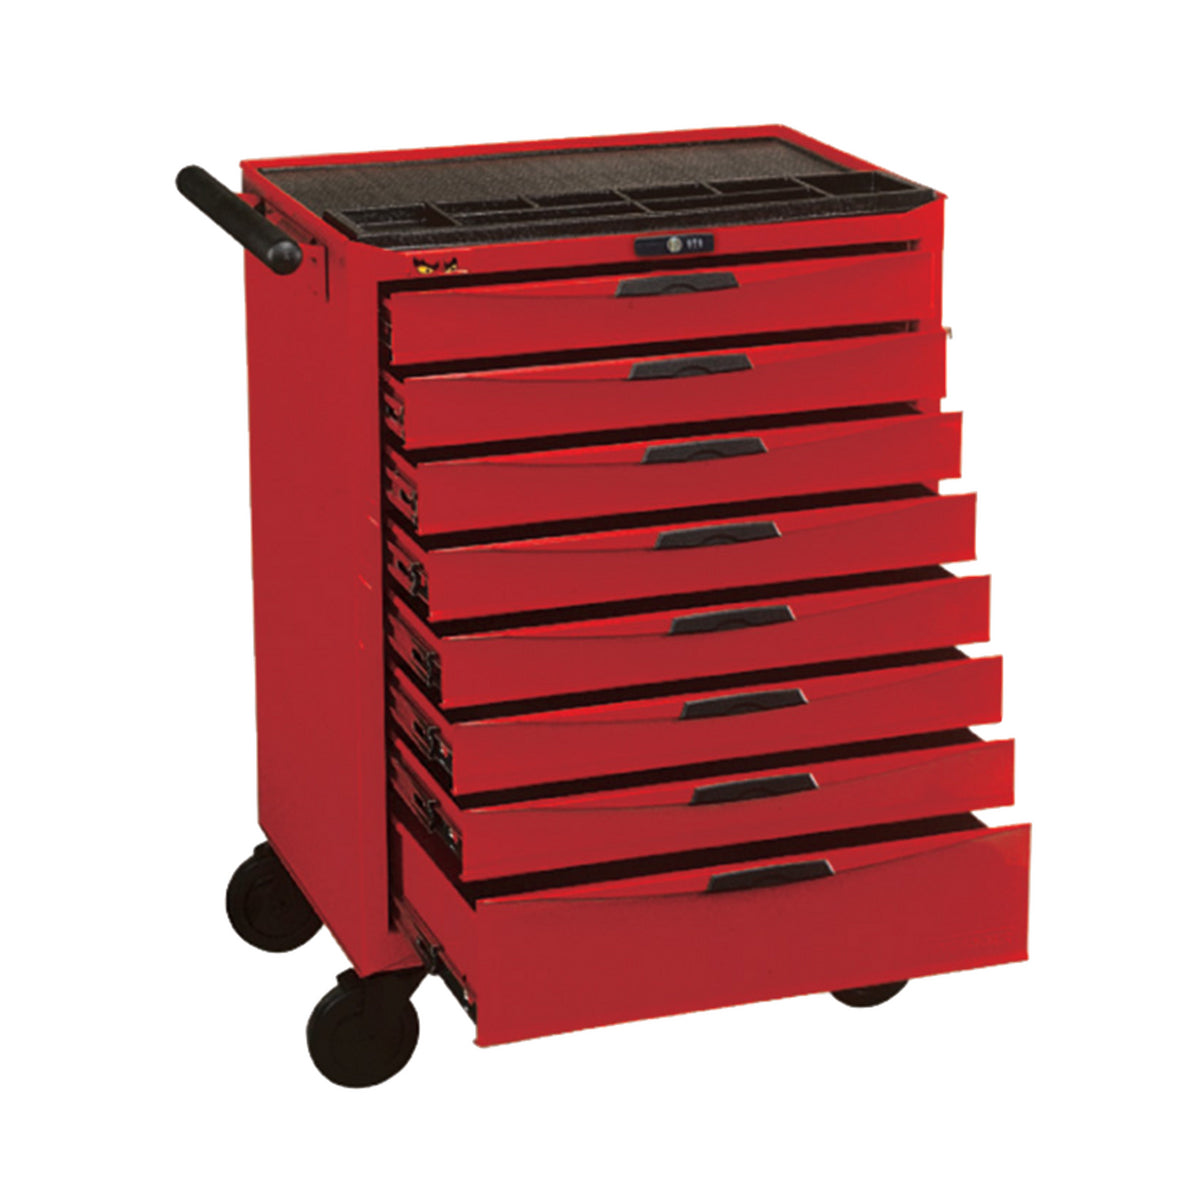 Teng Tools 8 Drawer Heavy Duty Roller Cabinet Tool Chest / Wagon